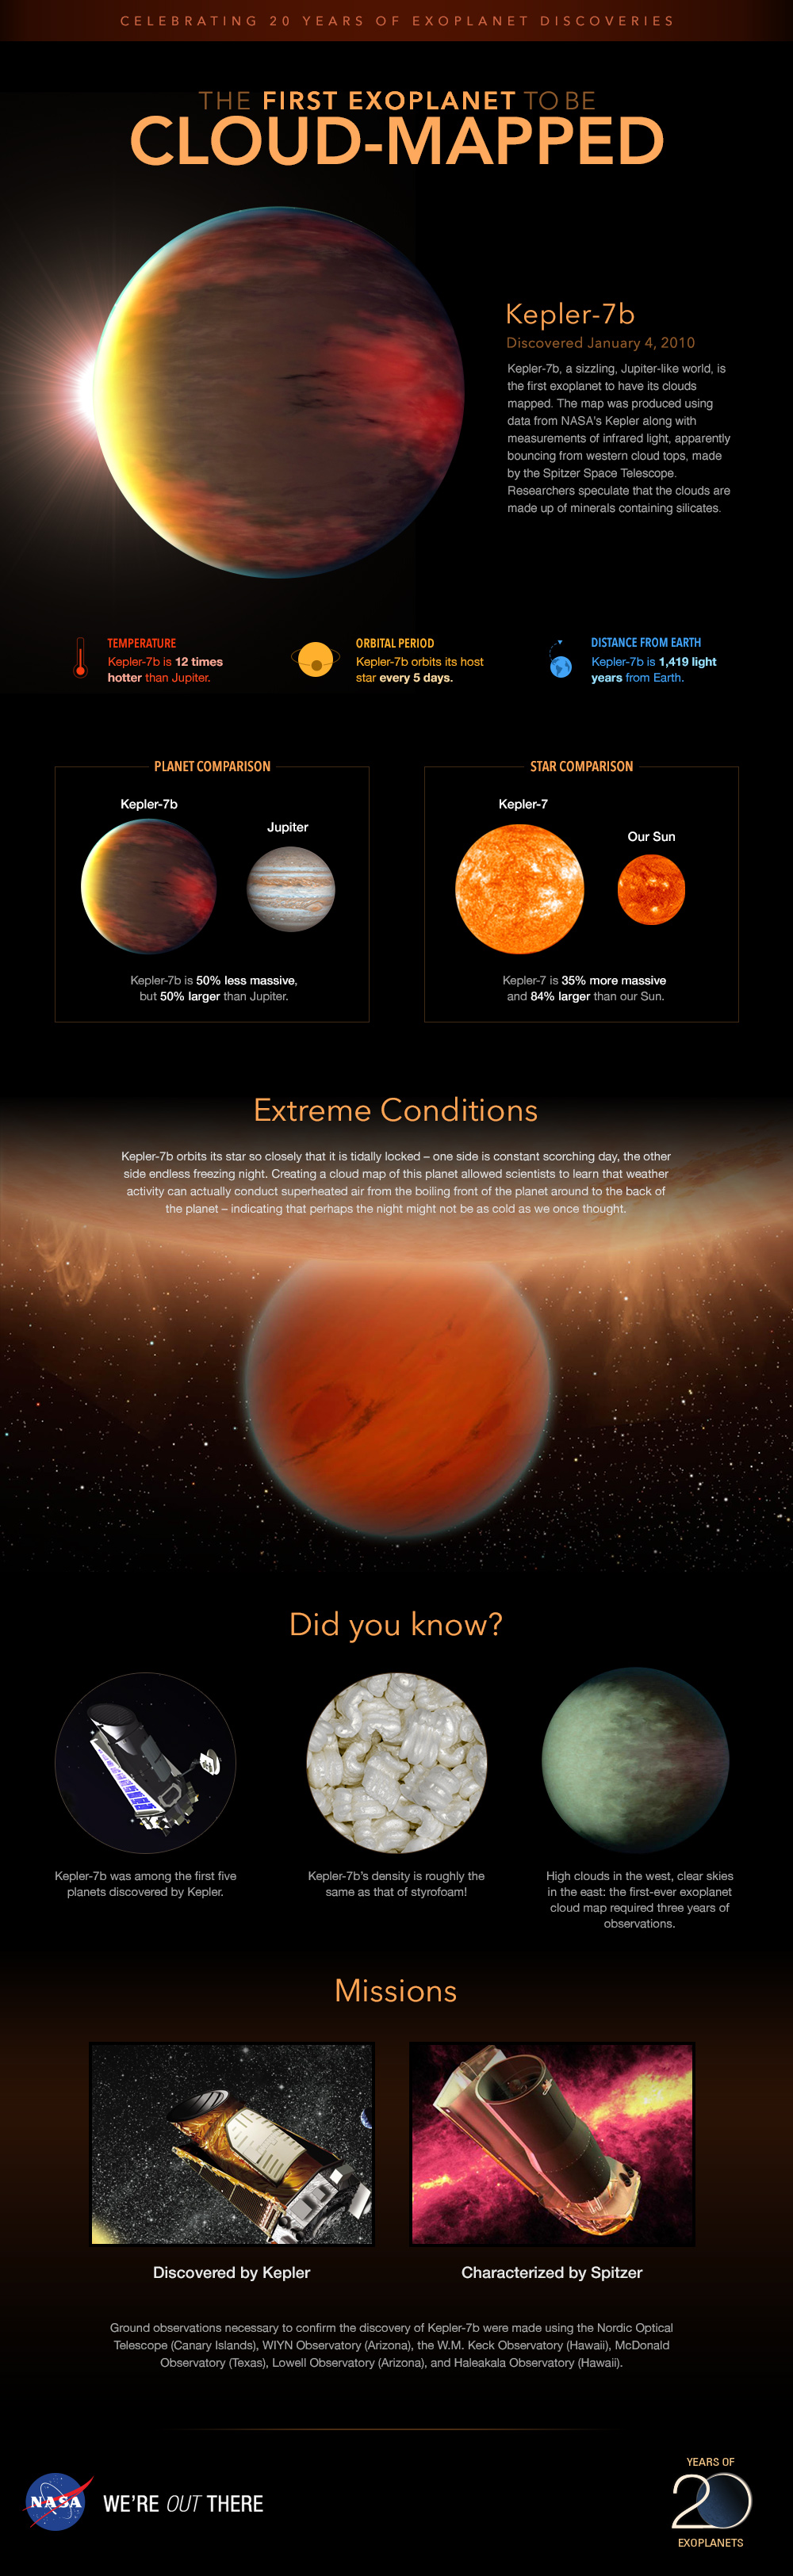 Infographic: Planet Kepler-7b, cloud mapped